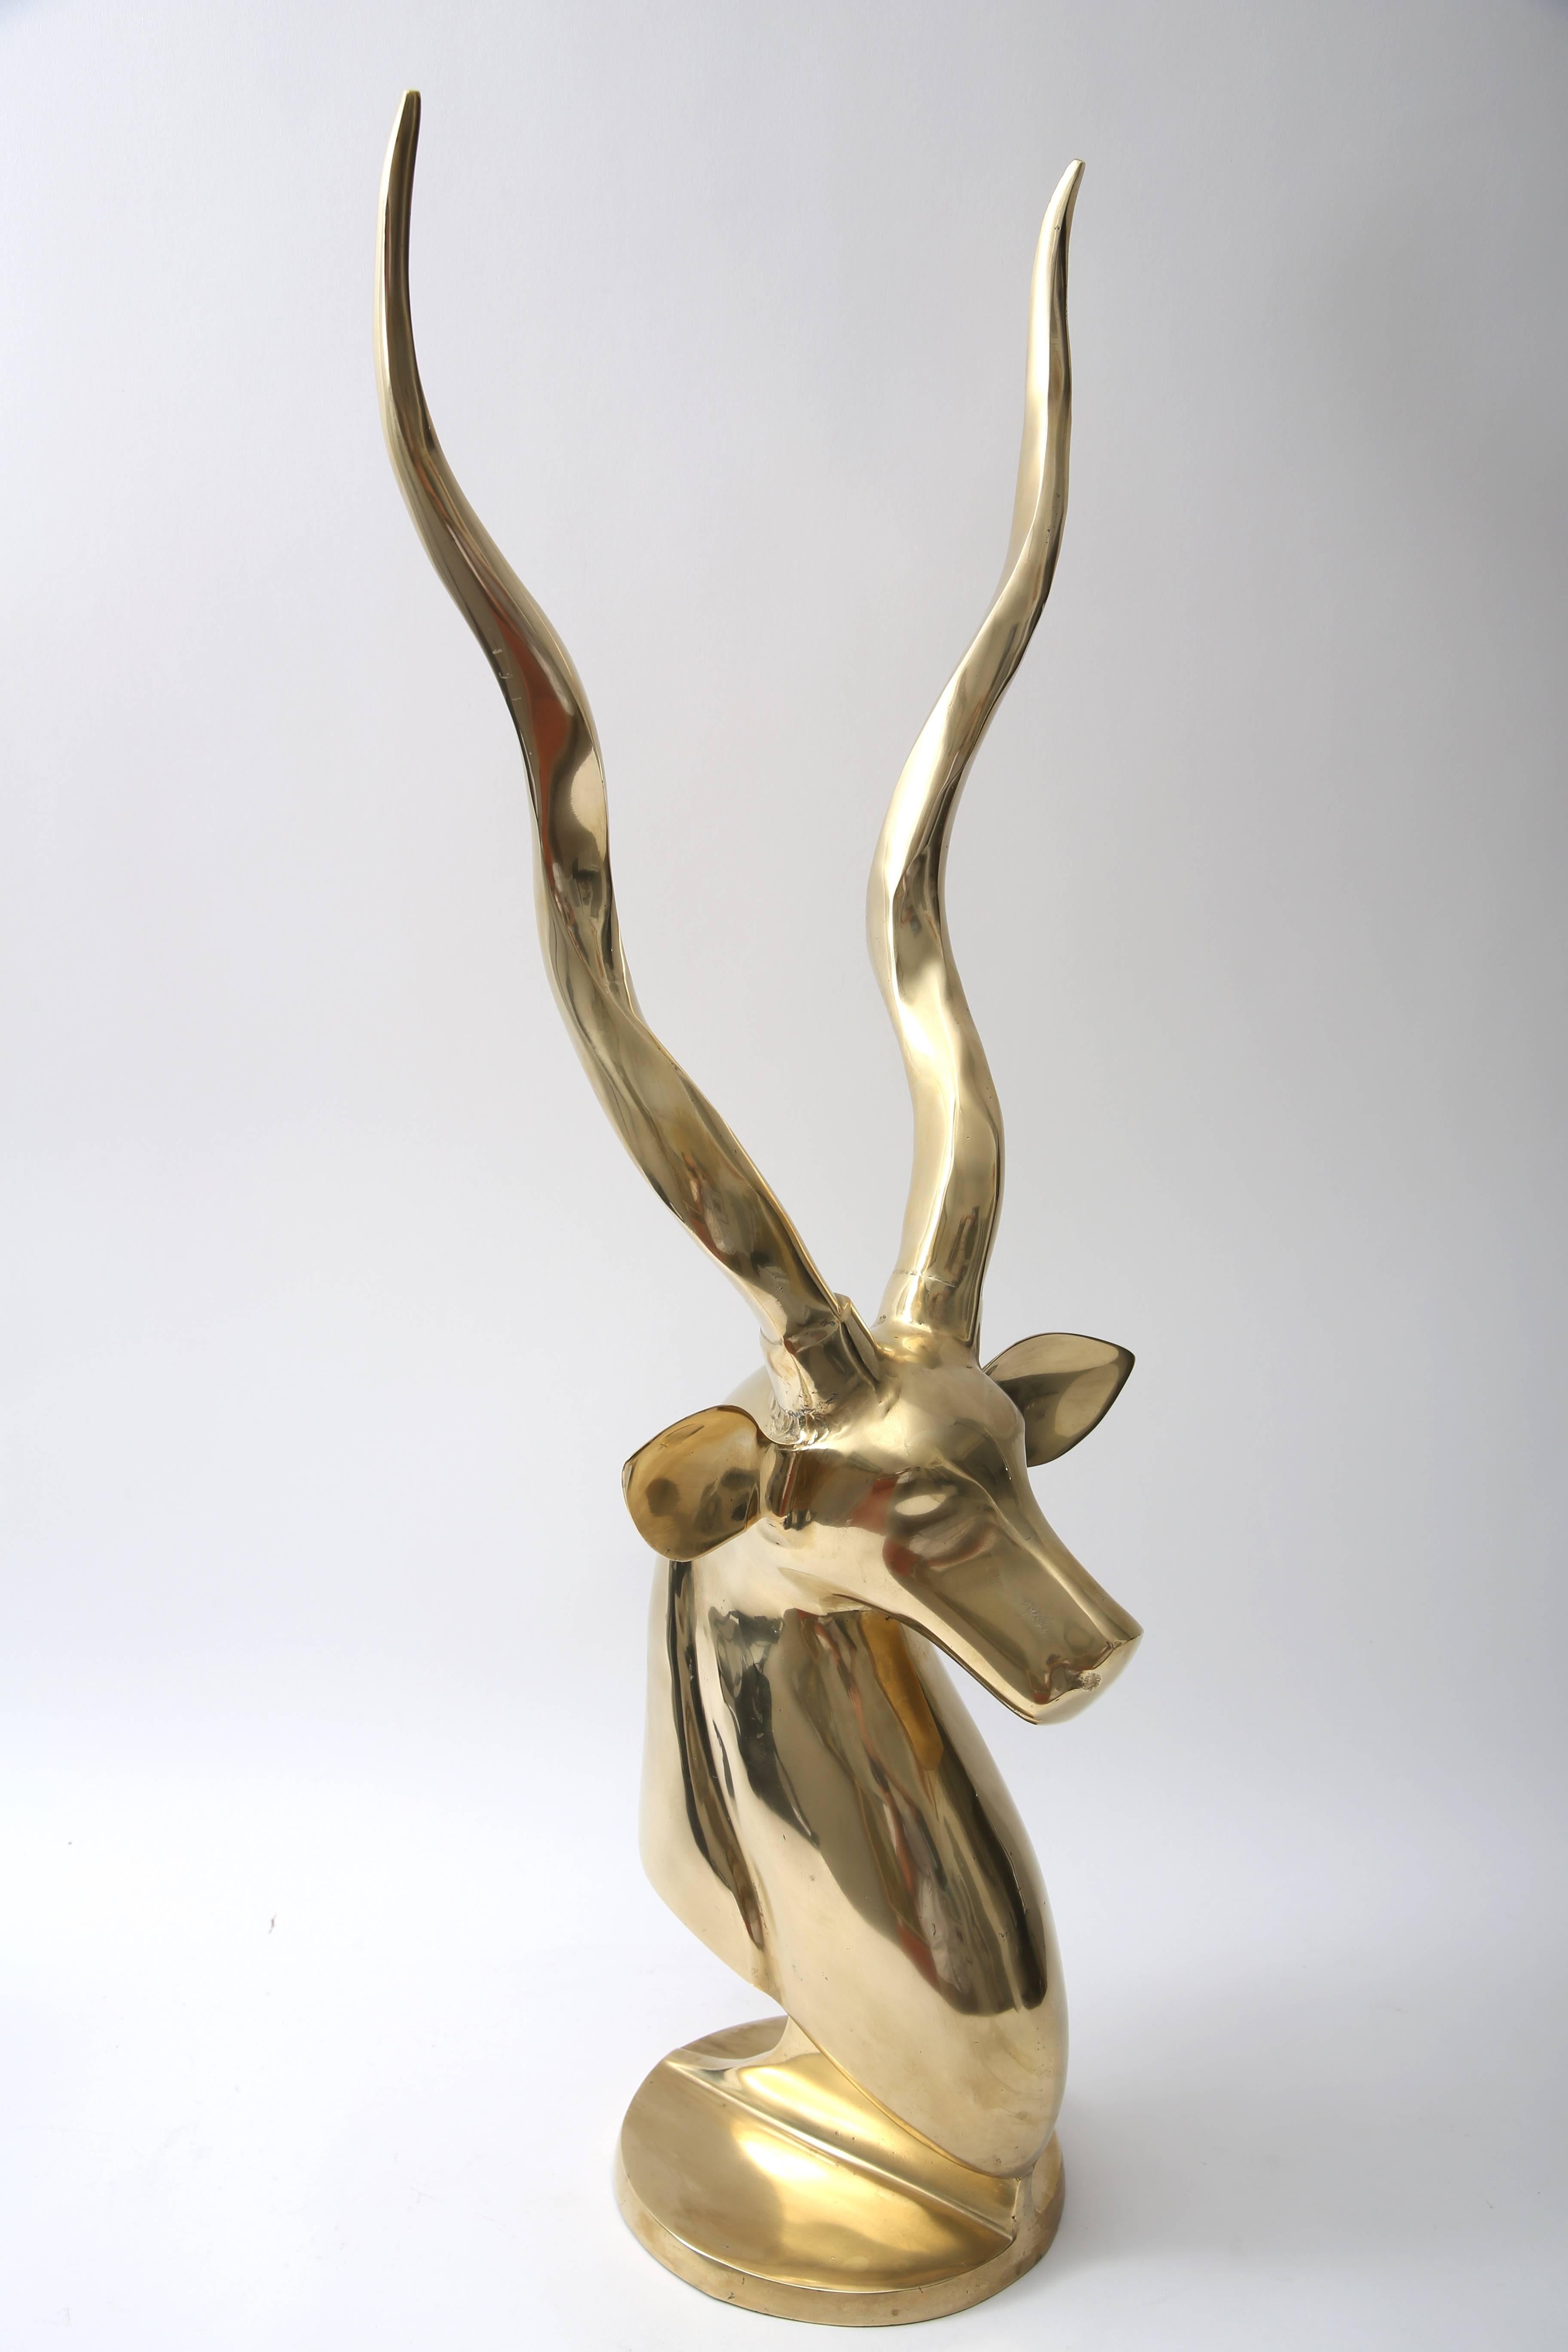 This stylish sculpture captures the exoticism and elegance of the Art Deco period with its stylized gazelle form and use of materials.

Note: Base measures 6.75